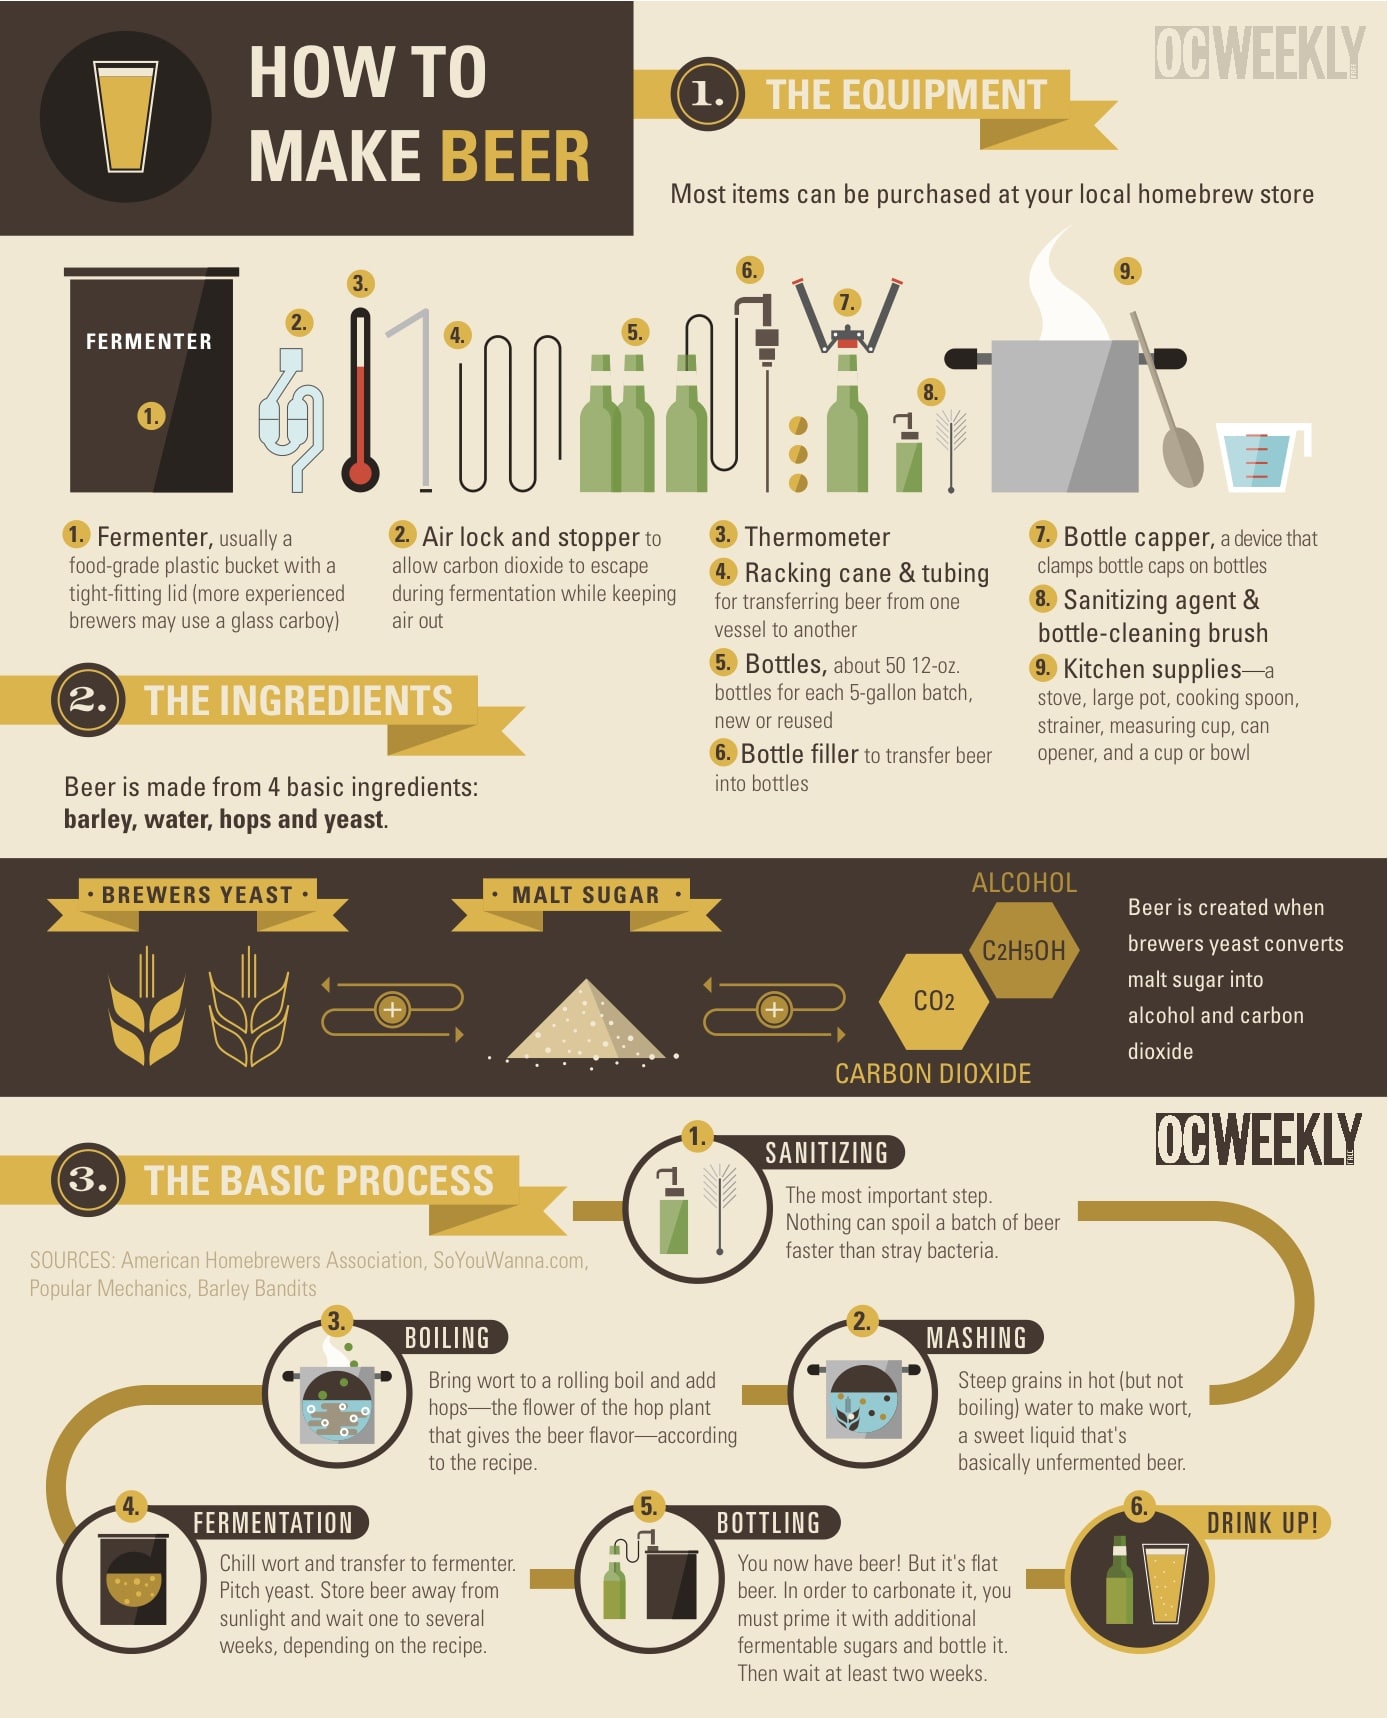 How To: Make Beer [Infographic]